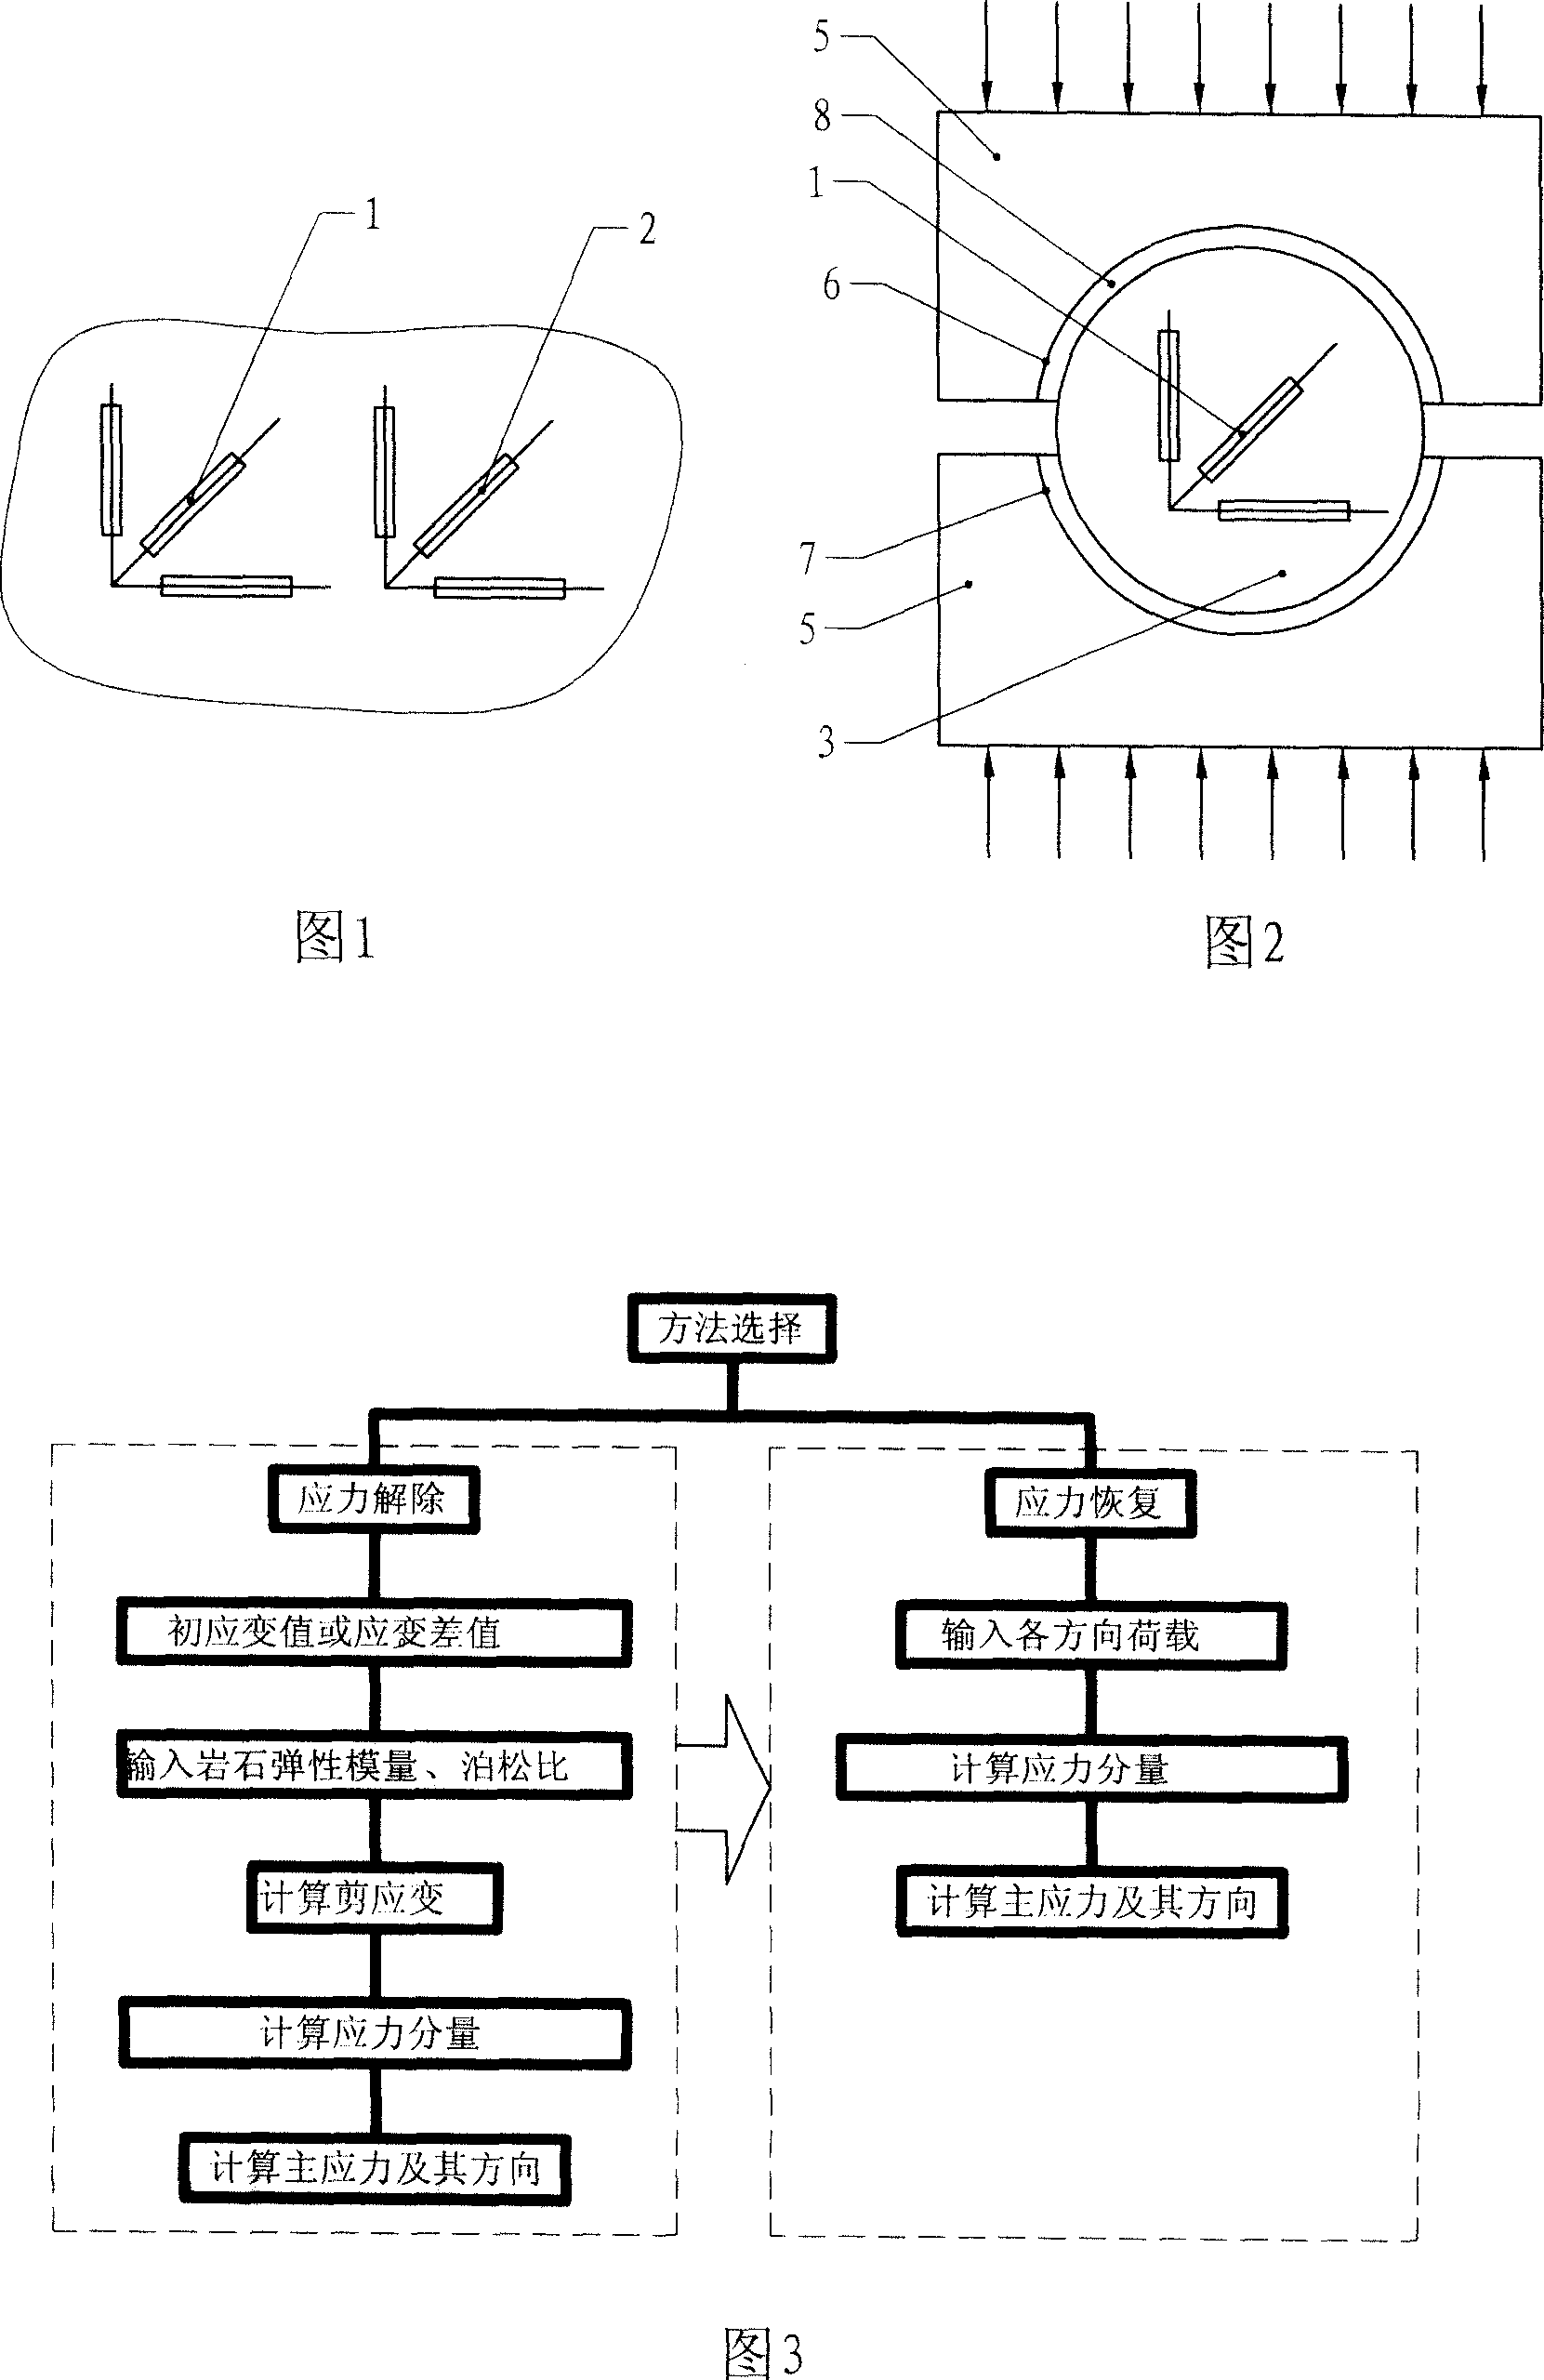 Method and apparatus for testing stress of cavern wall